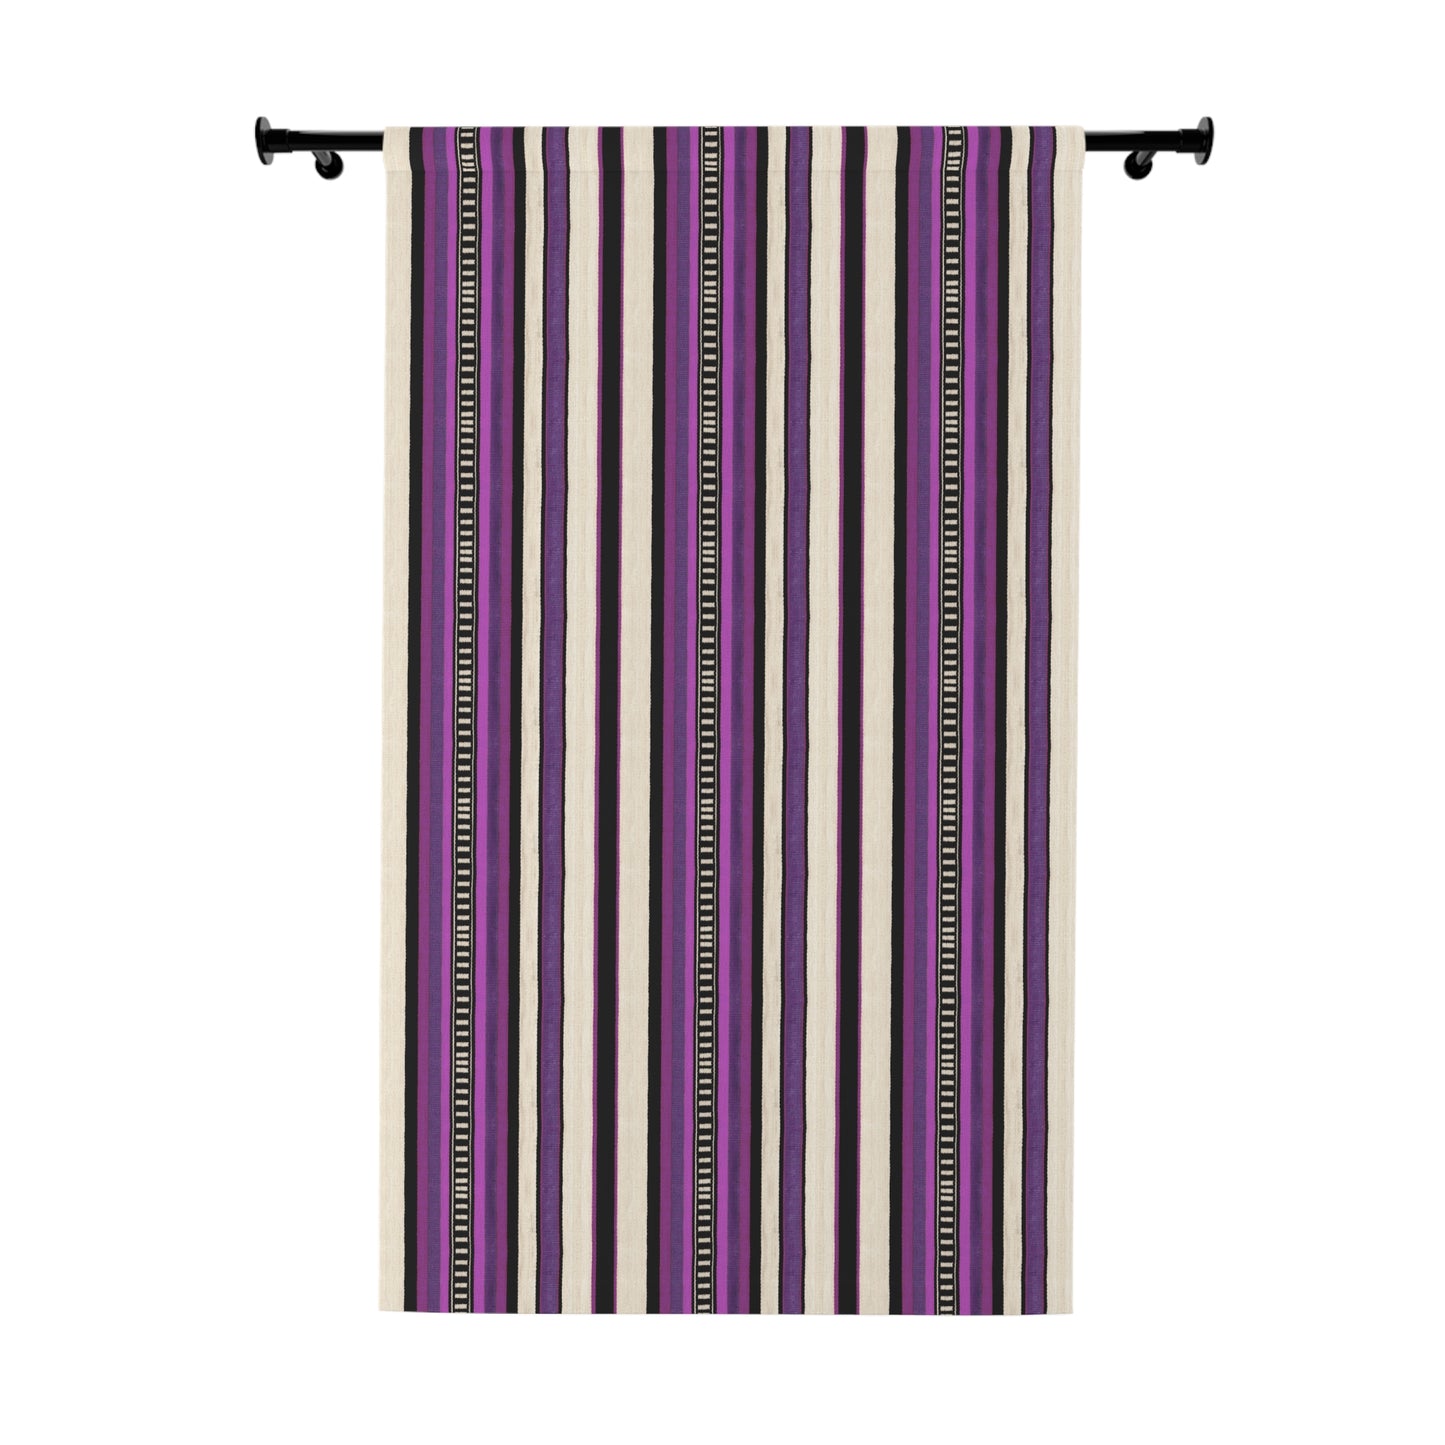 Modern Bohemian Curtains with Blackout in Colorful Ethnic Stripes  - Purple